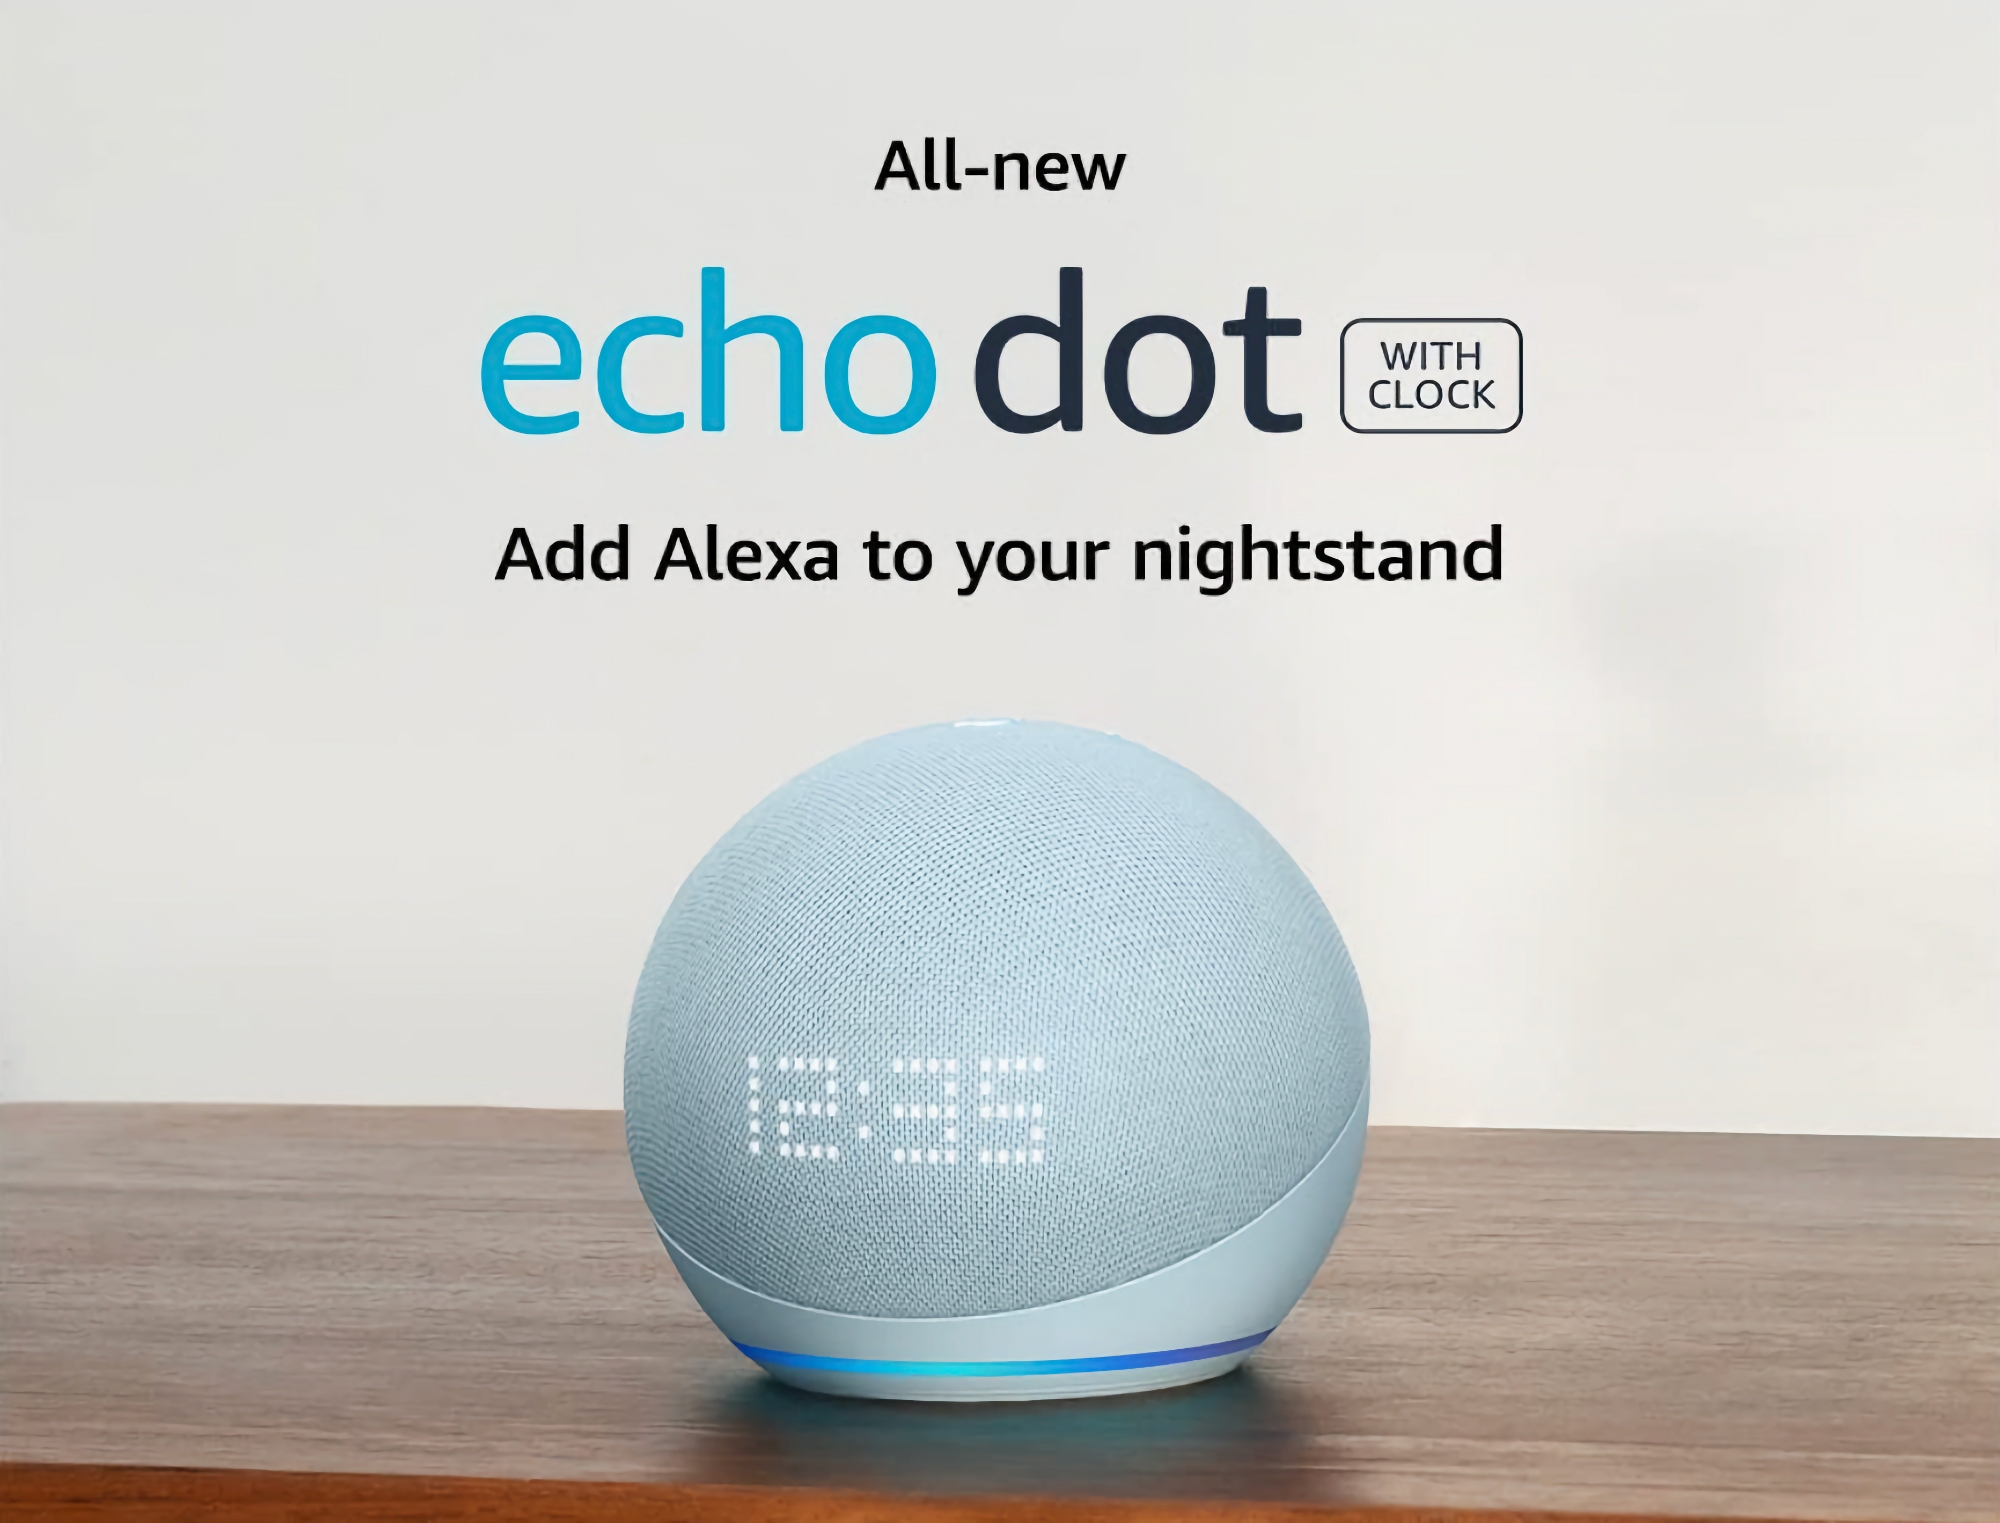 Amazon is selling the 5th generation Echo Dot smart speaker with motion sensor, built-in clock and Alexa support for $39 ($20 off)